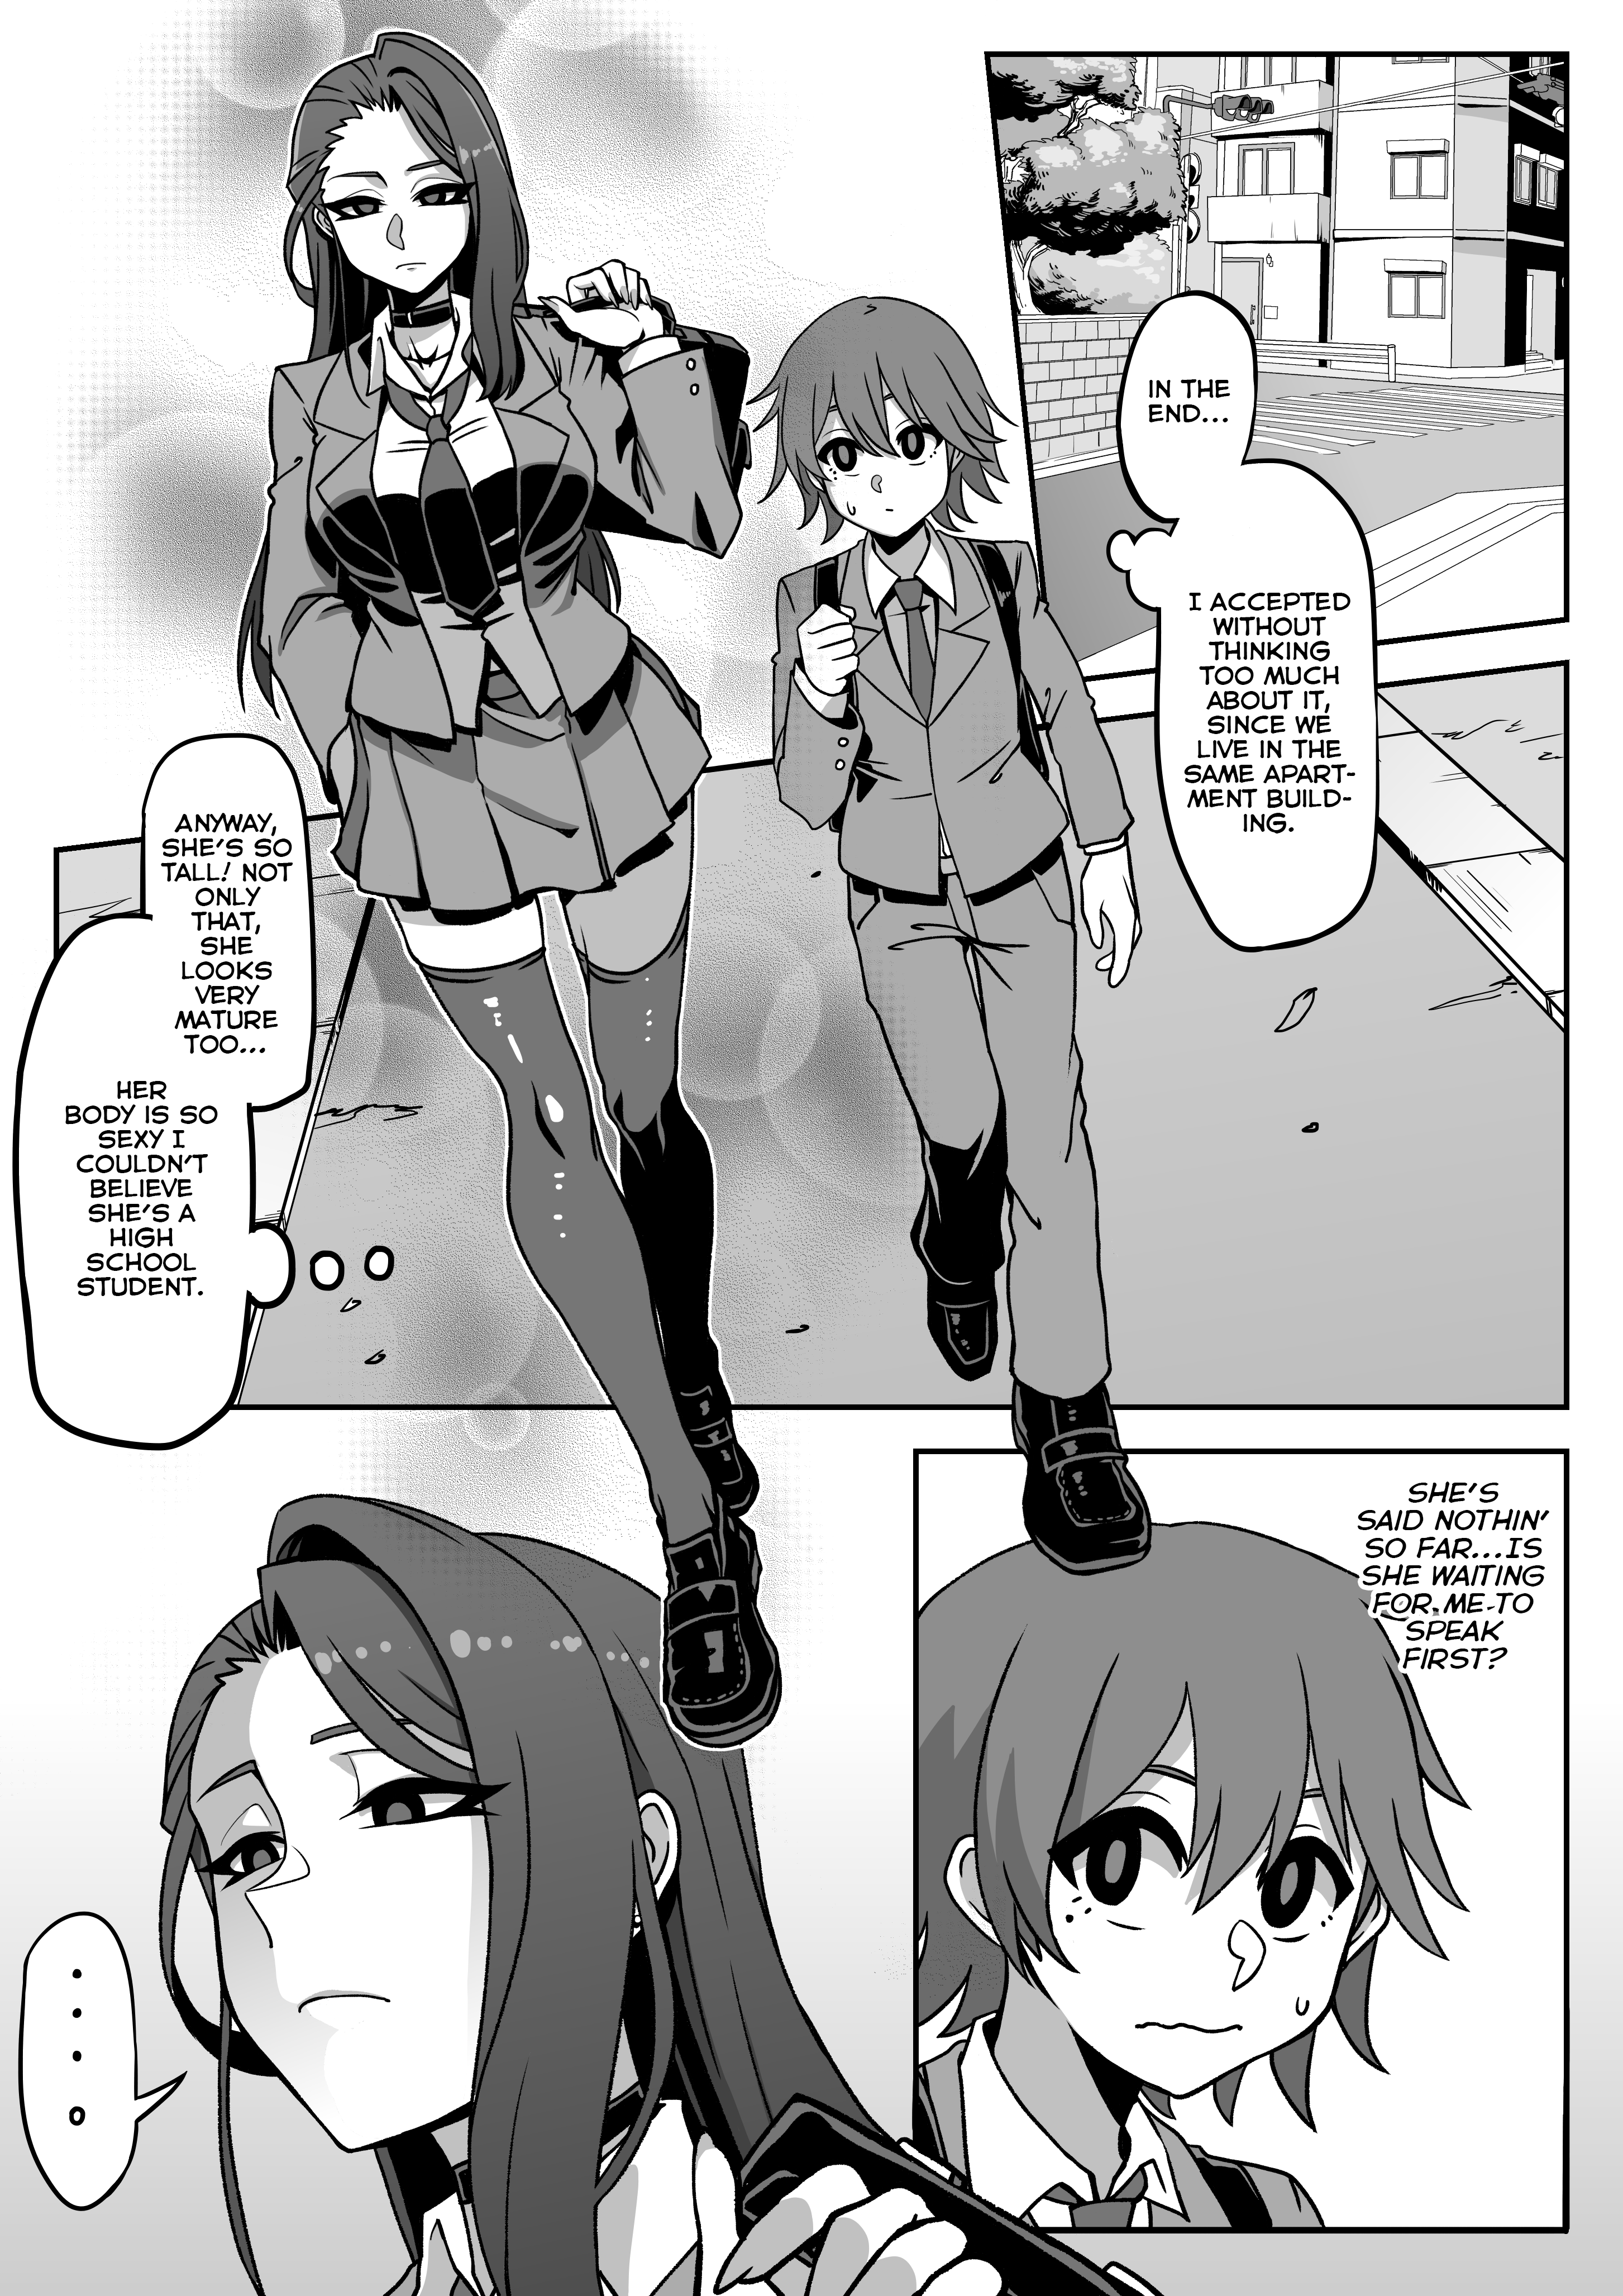 Something Naughty Would Happen If They Knew Each Other's Thoughts - chapter 3 - #4